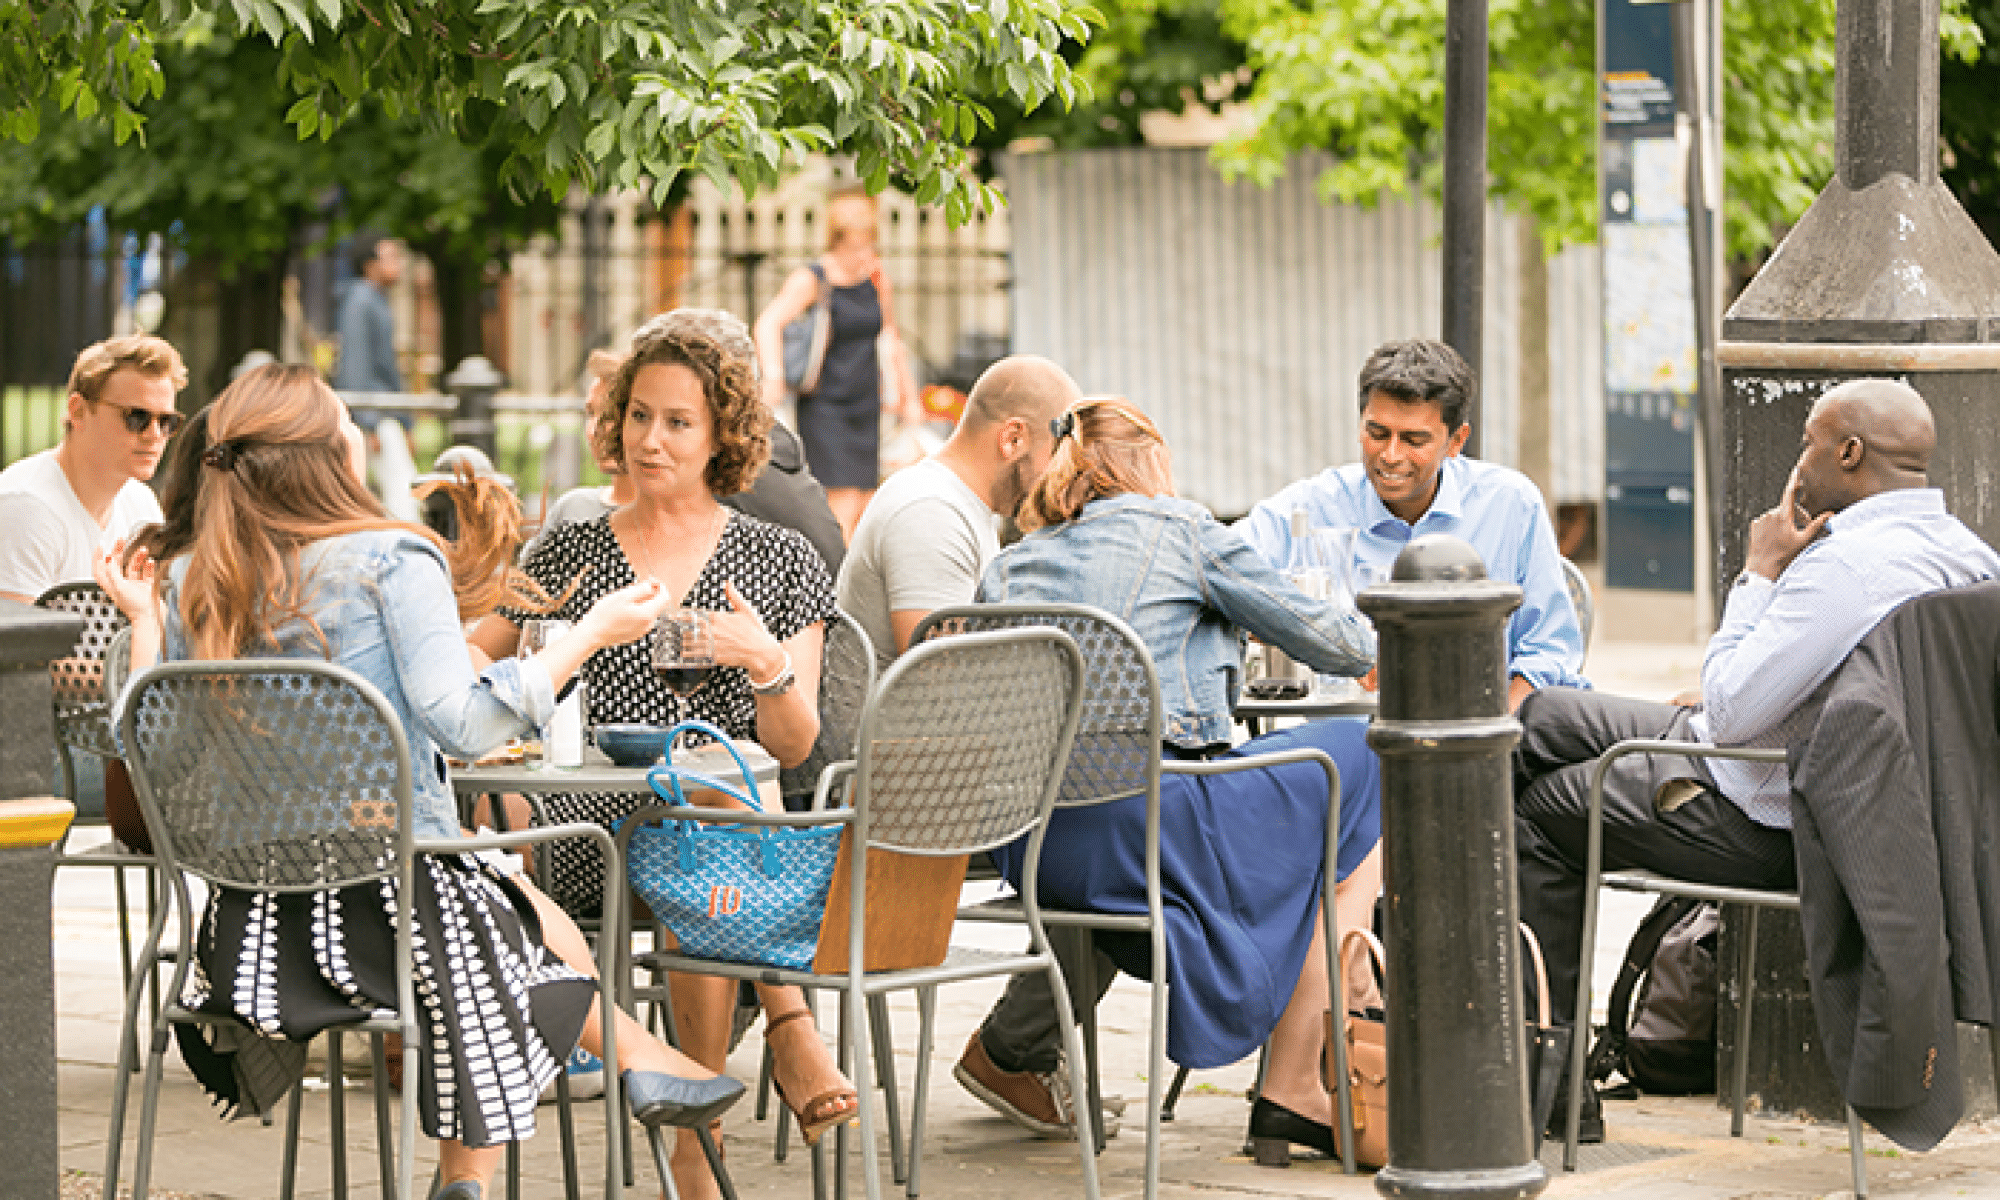 Food and drink, outside this summer in Vagabonds in Fulham